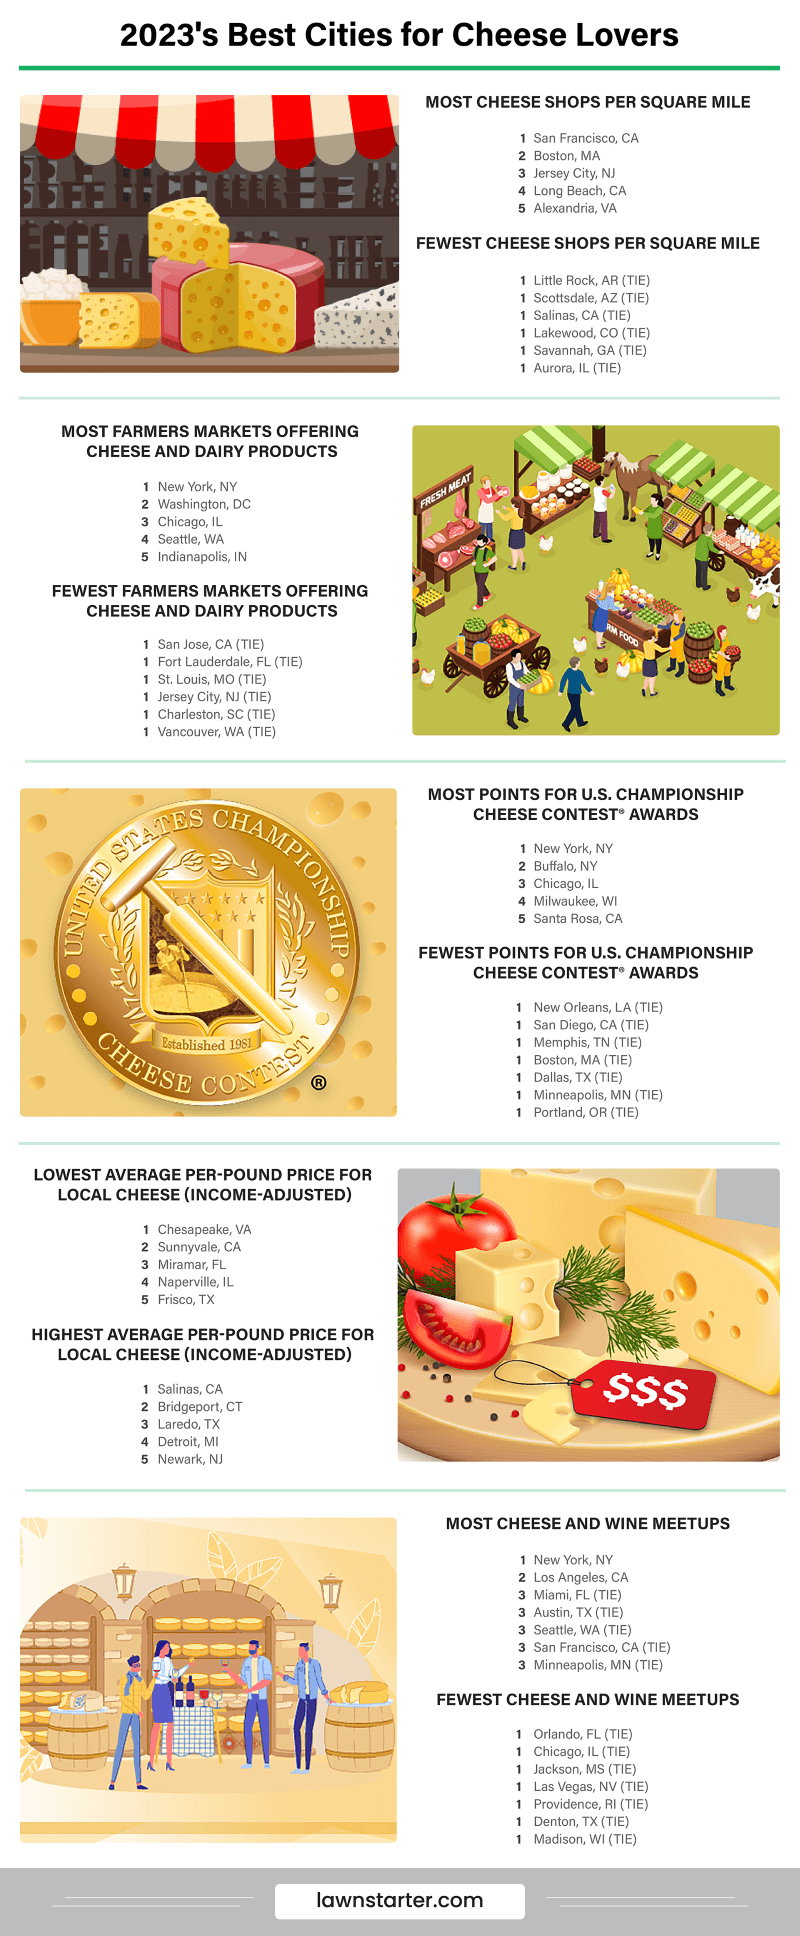 Infographic showing the Best Cities for Cheese Lovers, a ranking based on cheese access, quality, affordability, and community